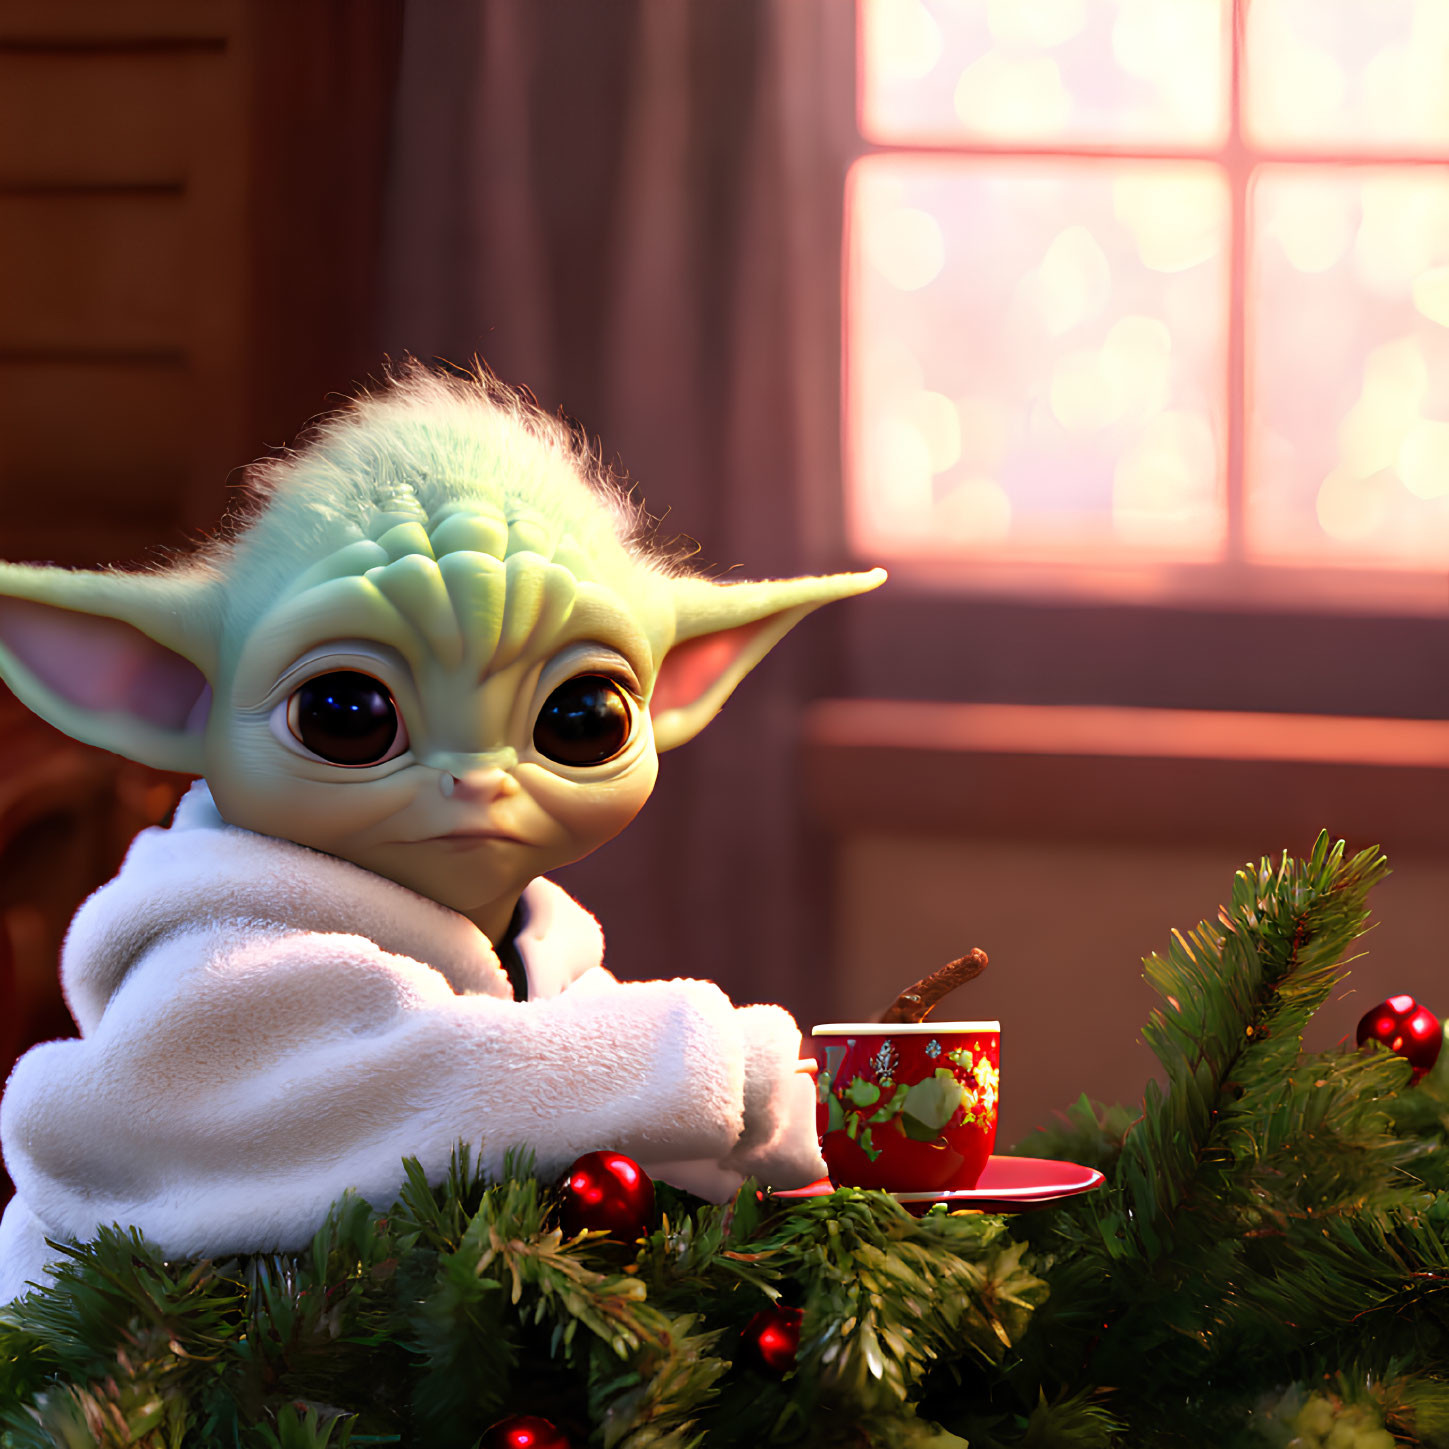 Adorable Baby Yoda with cookie and mug in festive setting